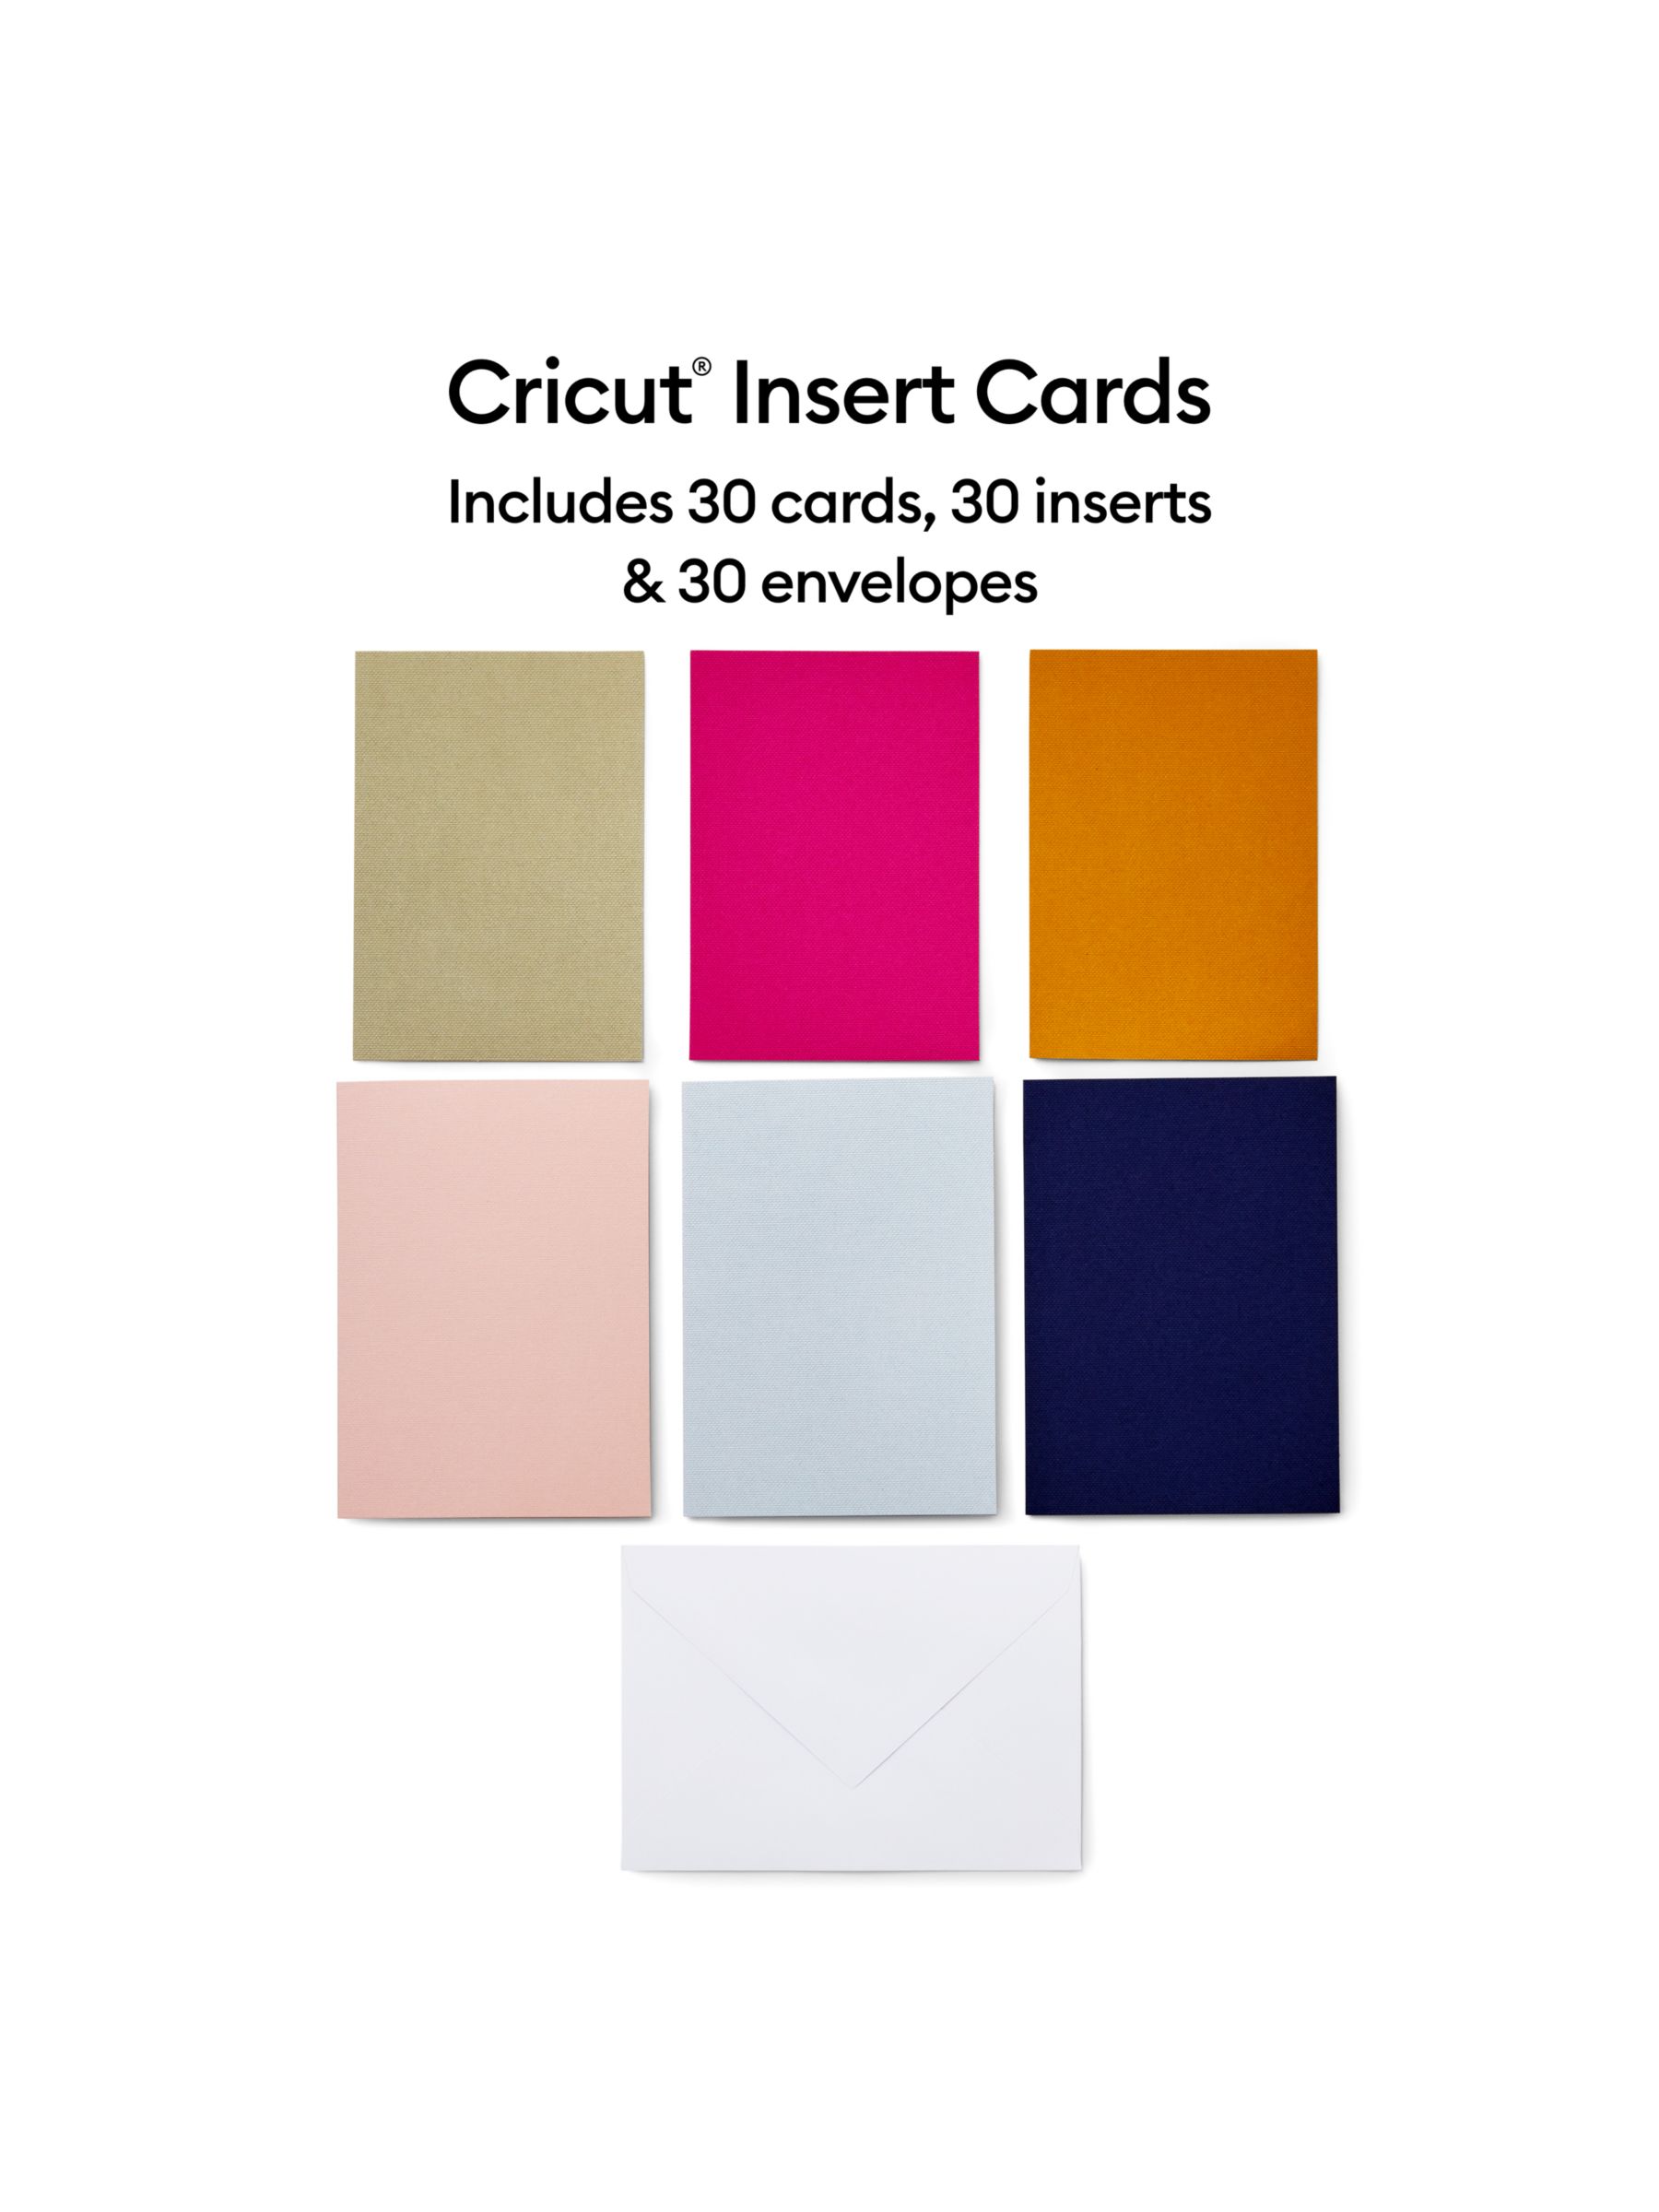 Official Cricut Cardstock, Up-to 30% Off Sale